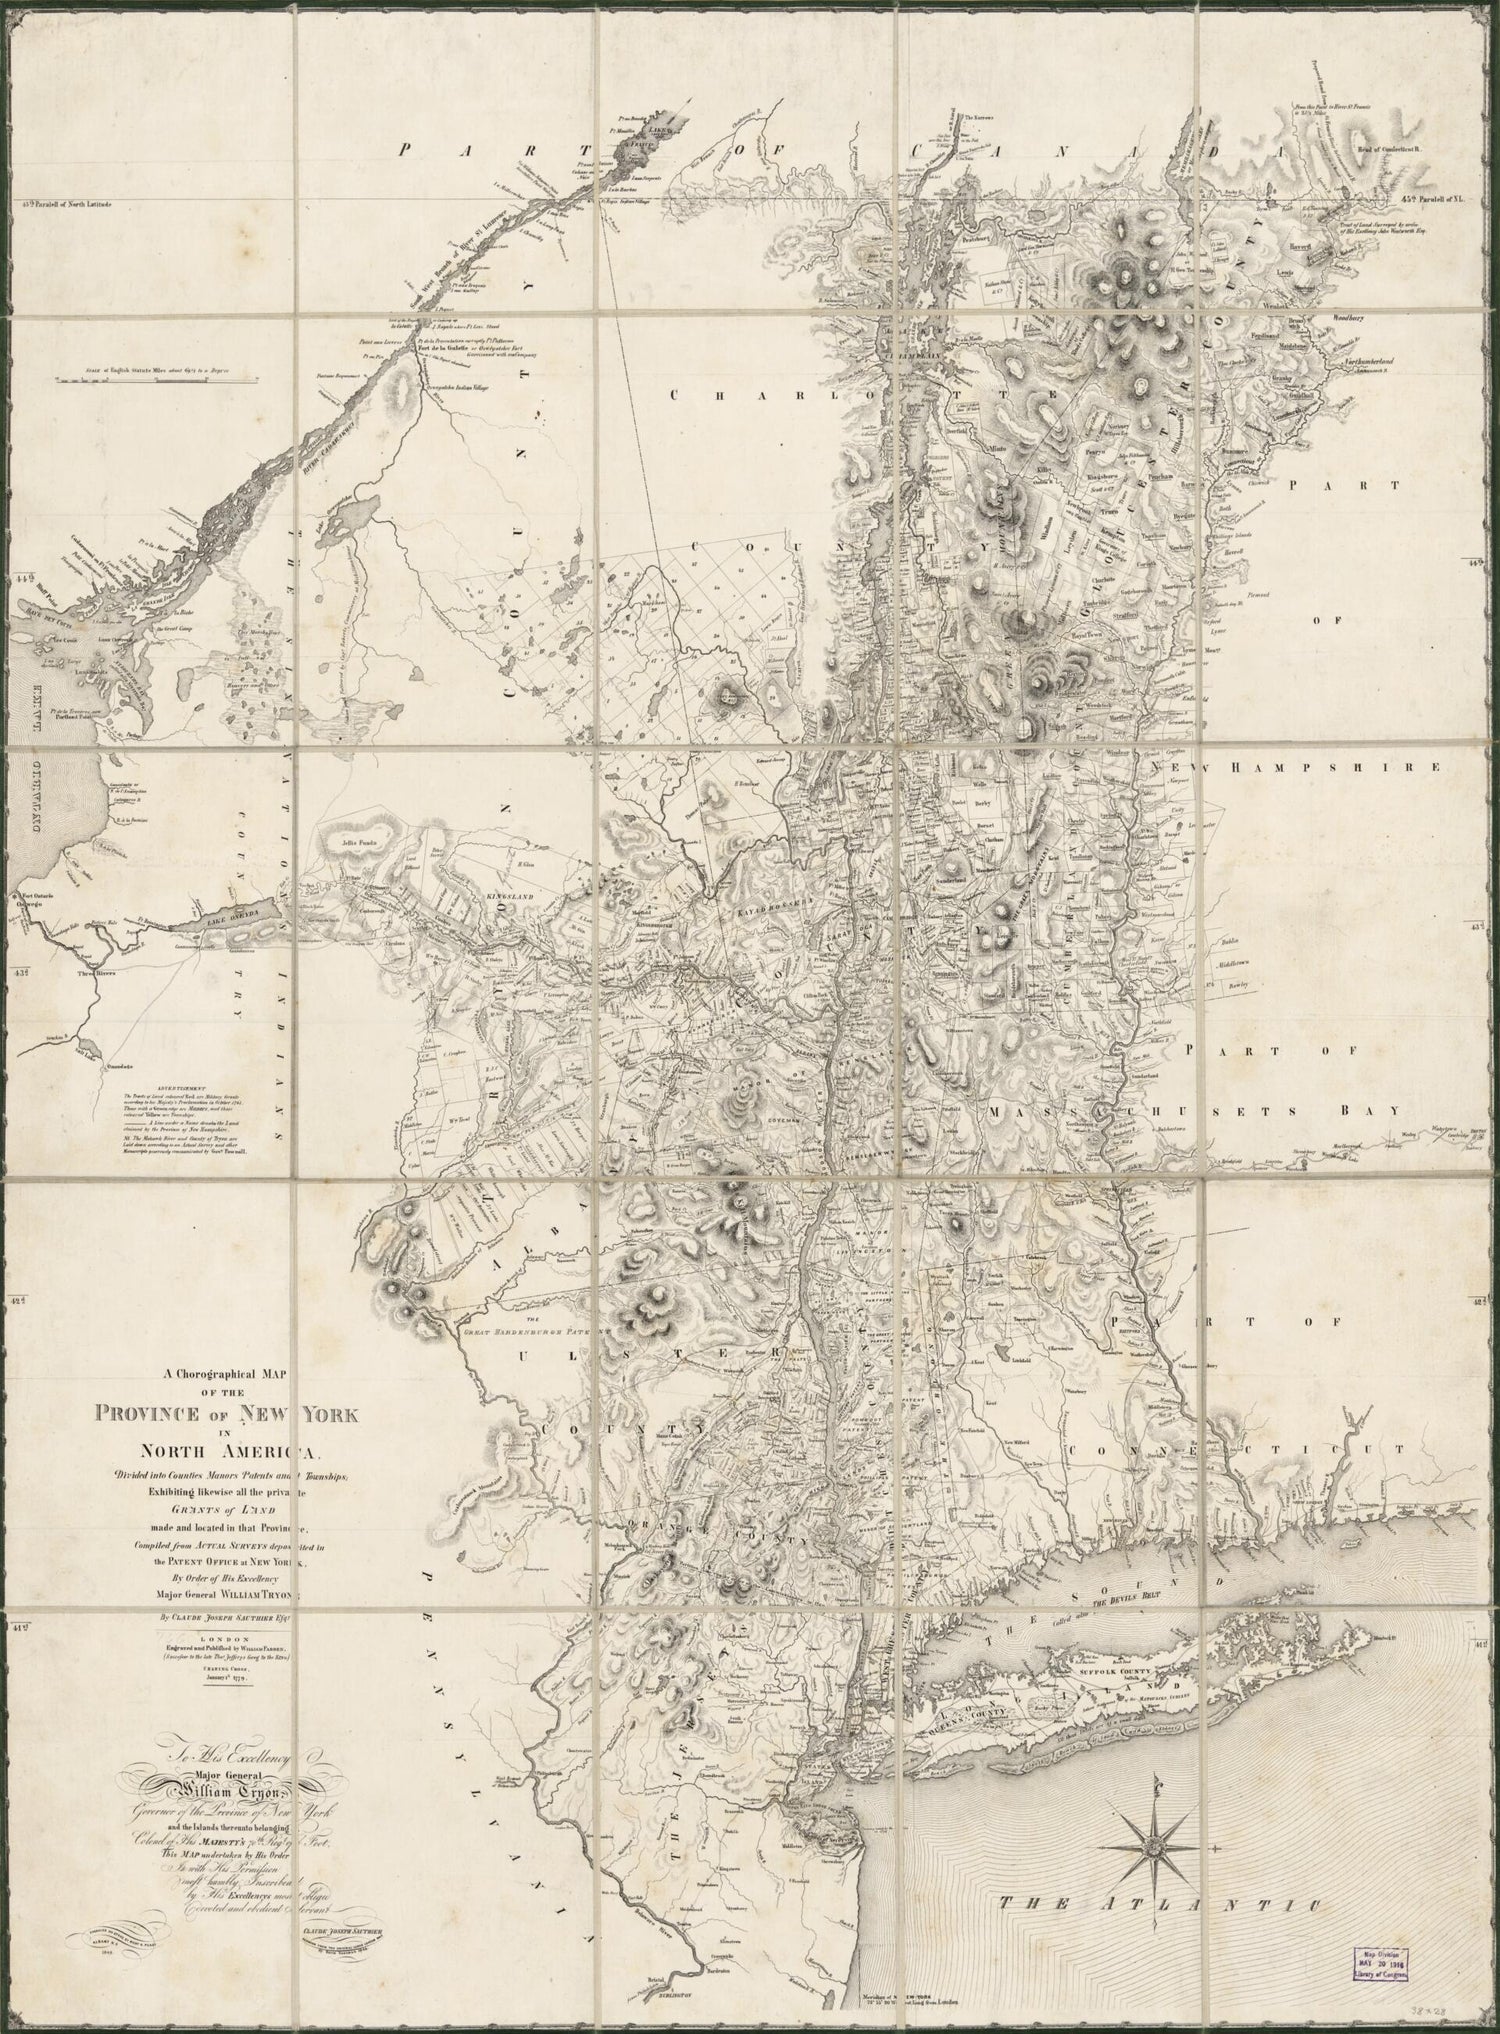 This old map of A Chorographical Map of the Province of New York In North America : Divided Into Counties, Manors, Patents, and Townships : Exhibiting Likewise All the Private Grants of Land Made and Located In That Province from 1849 was created by Will